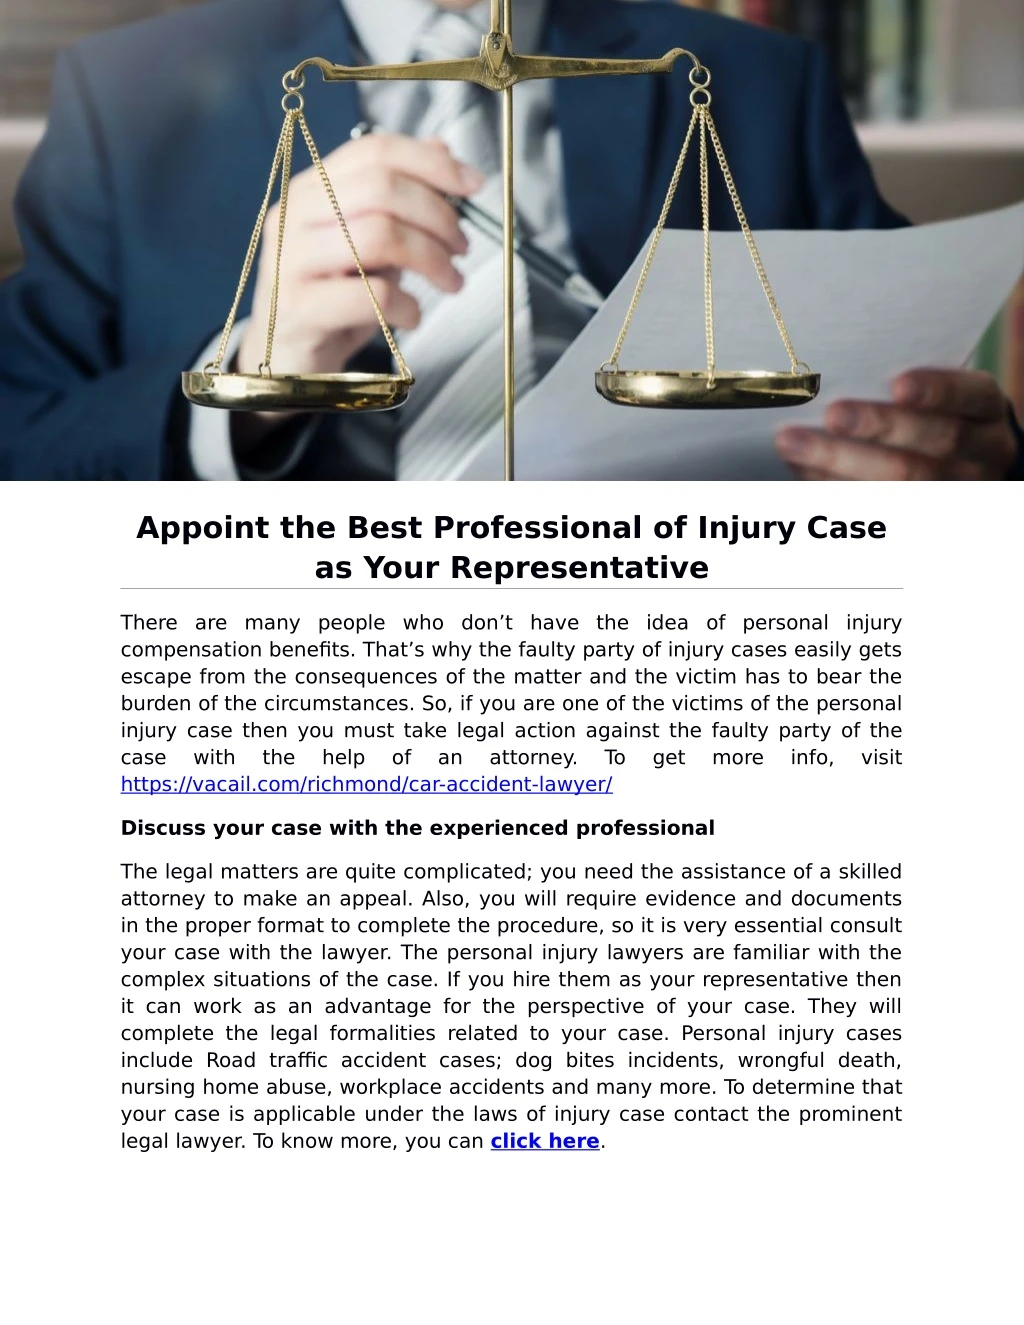 appoint the best professional of injury case